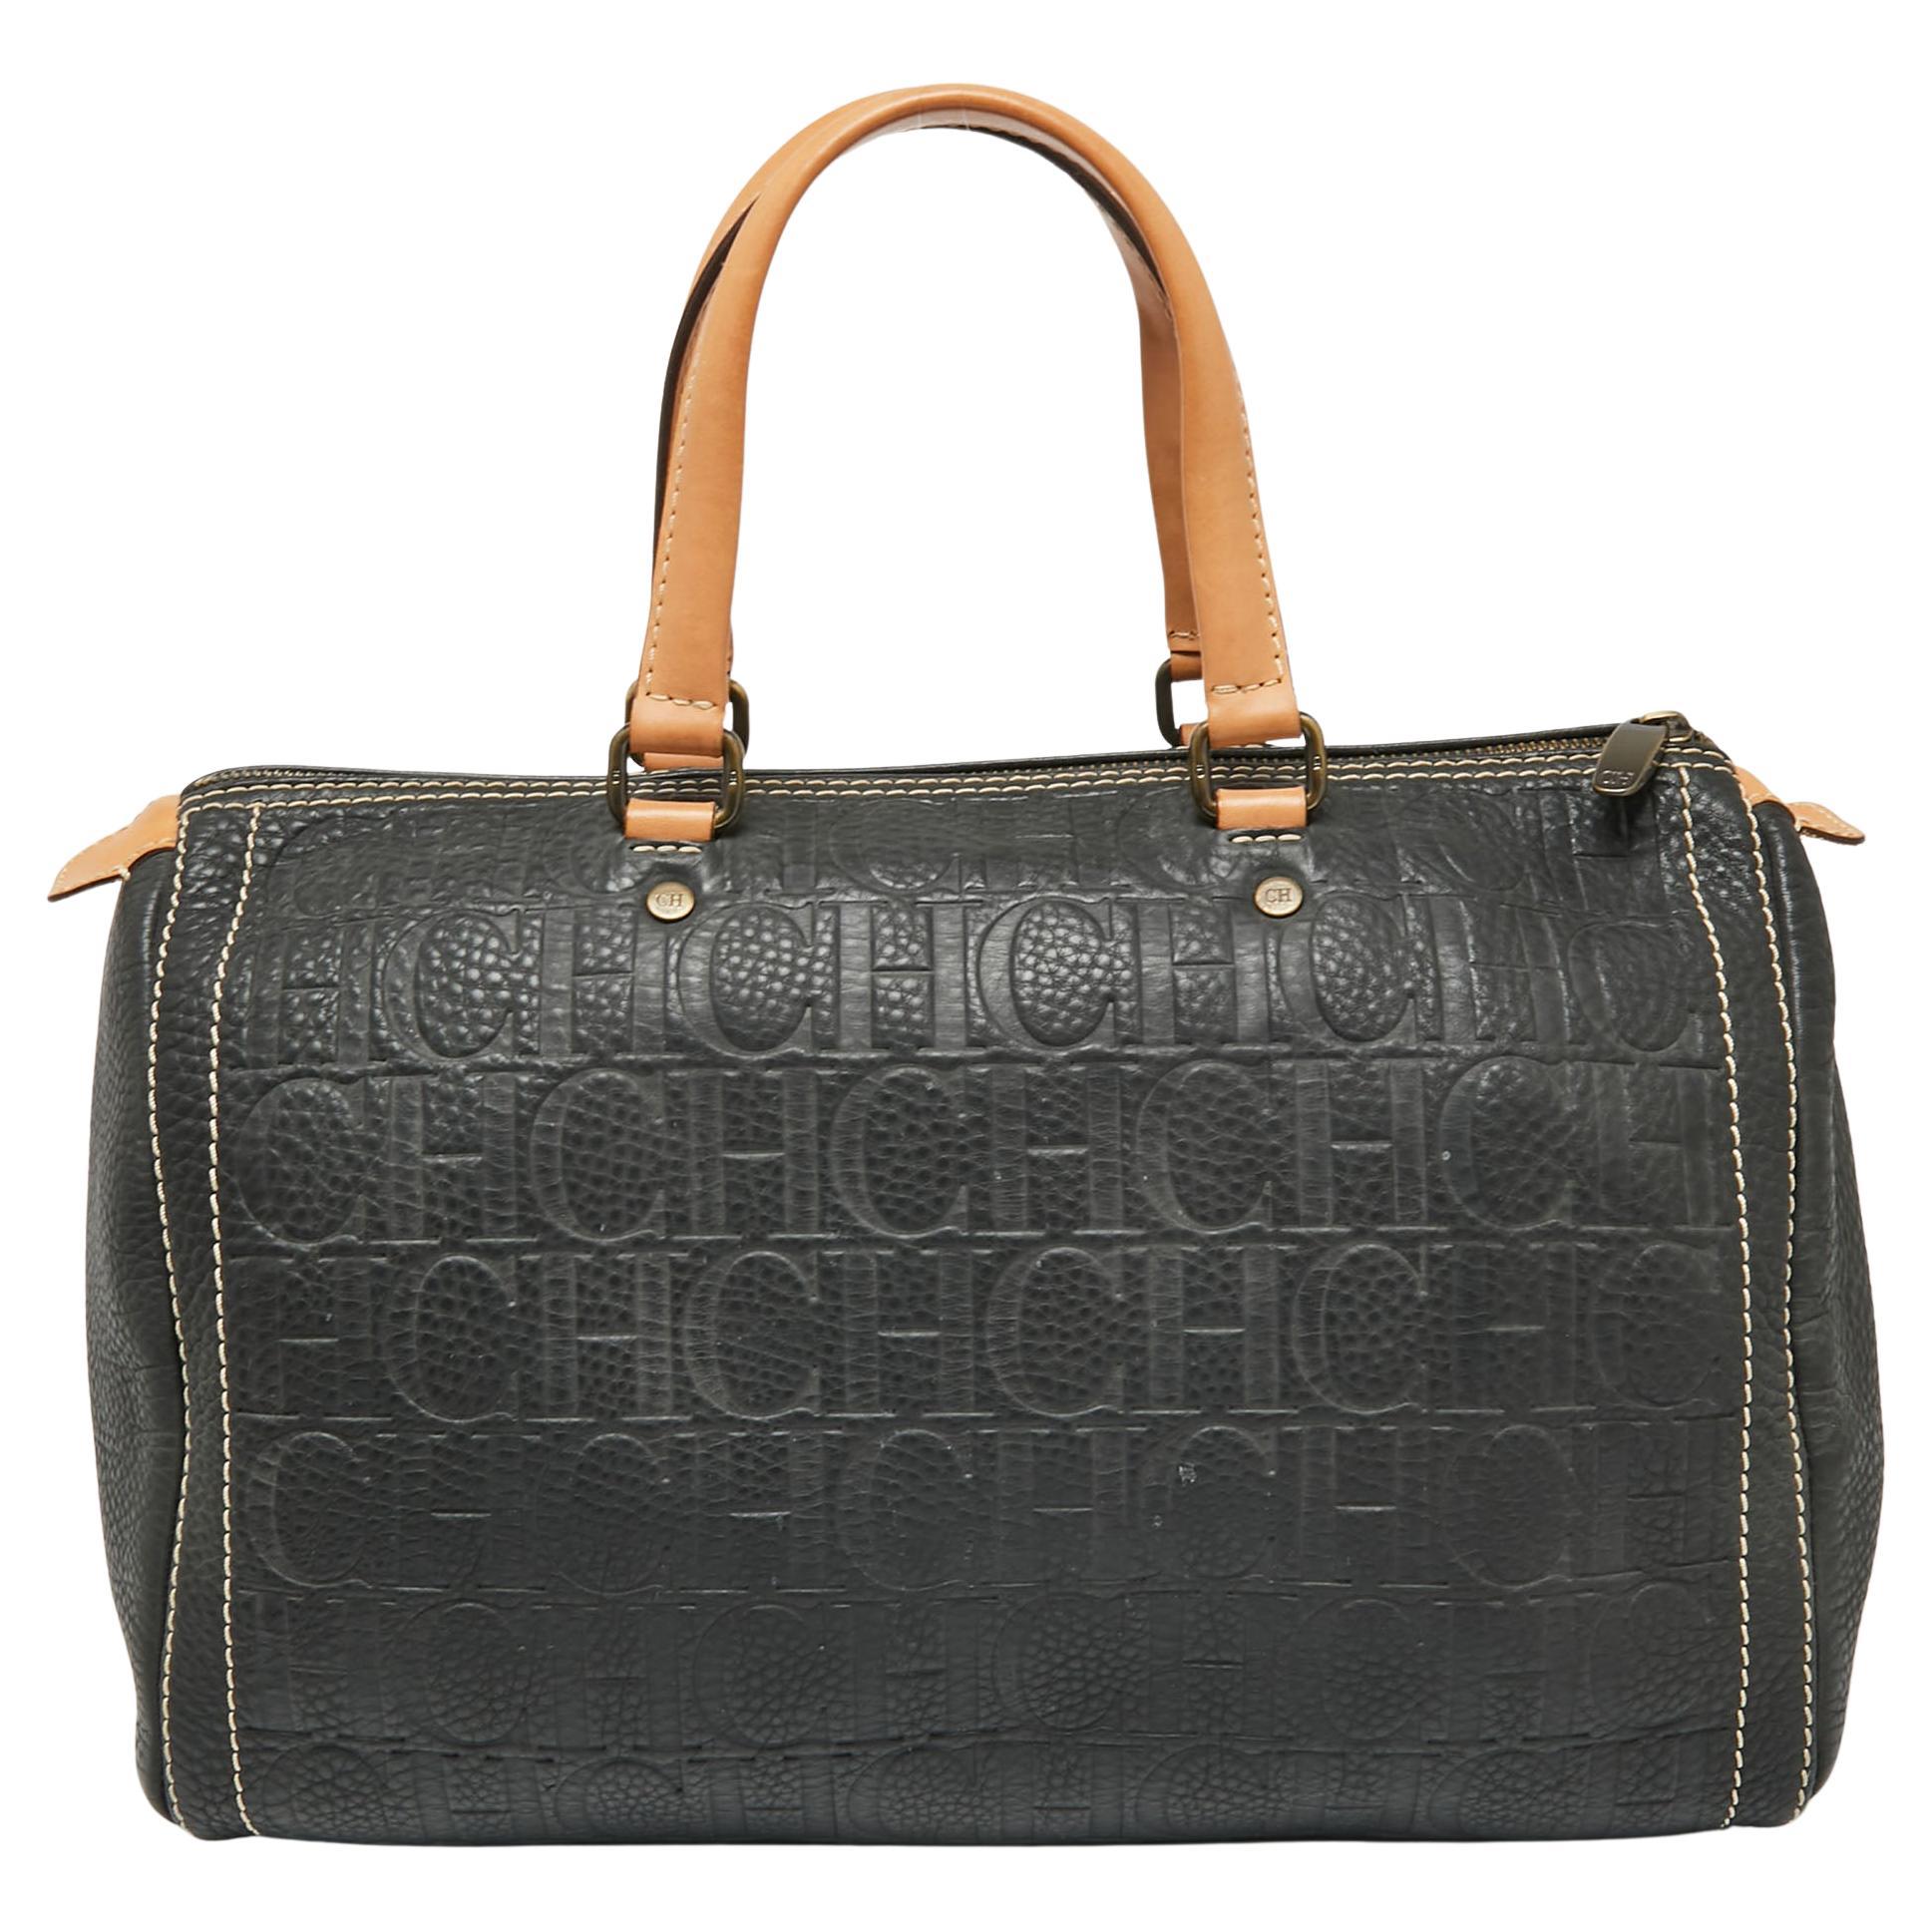 This Andy Boston bag by CH Carolina Herrera comes crafted from dark grey monogram leather and is styled with contrast stitching. It features a top zip closure, two handles, and a spacious suede interior to house your essentials. This bag is a